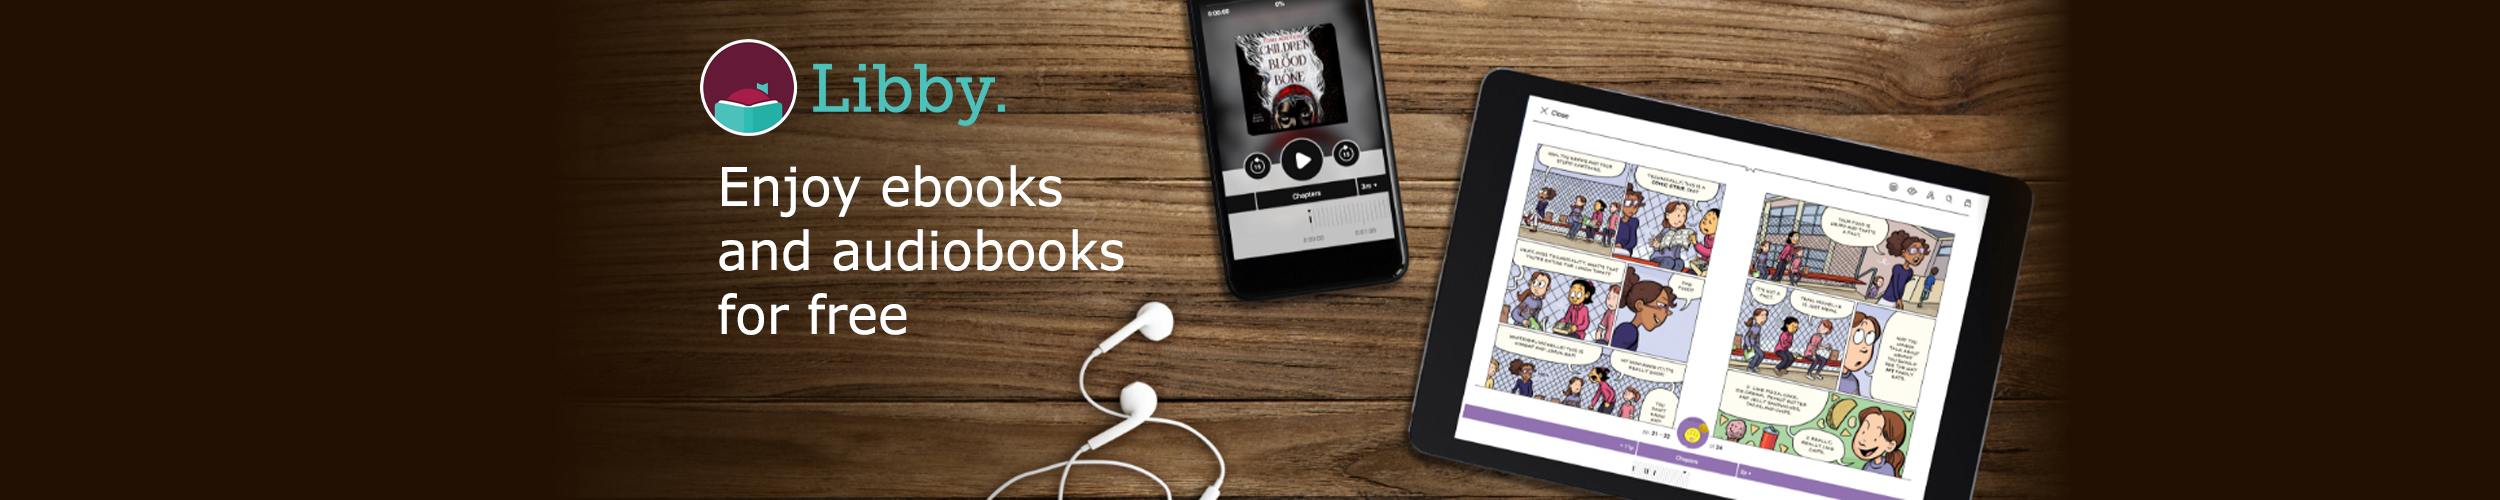 Cell phone and tablet. "Libby. Enjoy ebooks  and audiobooks  for free"